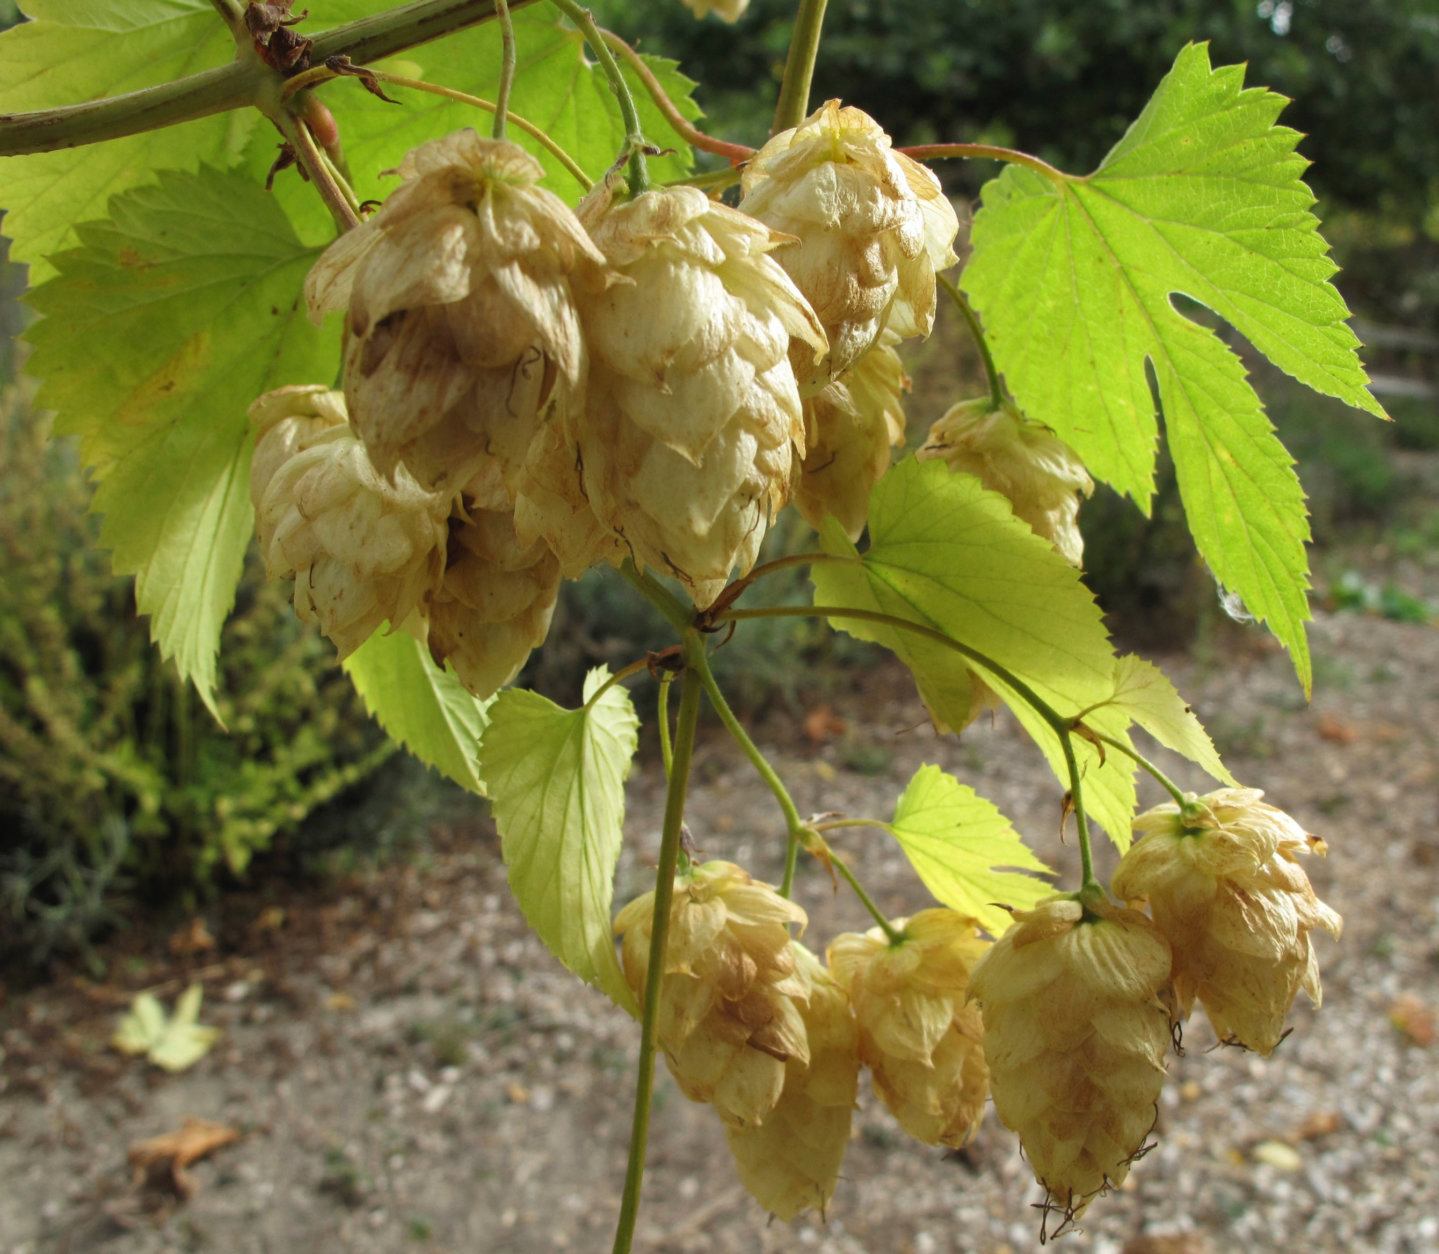 This Oct. 2, 2013 photo shows hop flowers that are both ornamental and edible in a garden in Langley, Wash. Hops are an easy-to-grow perennial that greatly enhance a beers flavor when picked fresh. (AP Photo/Dean Fosdick)